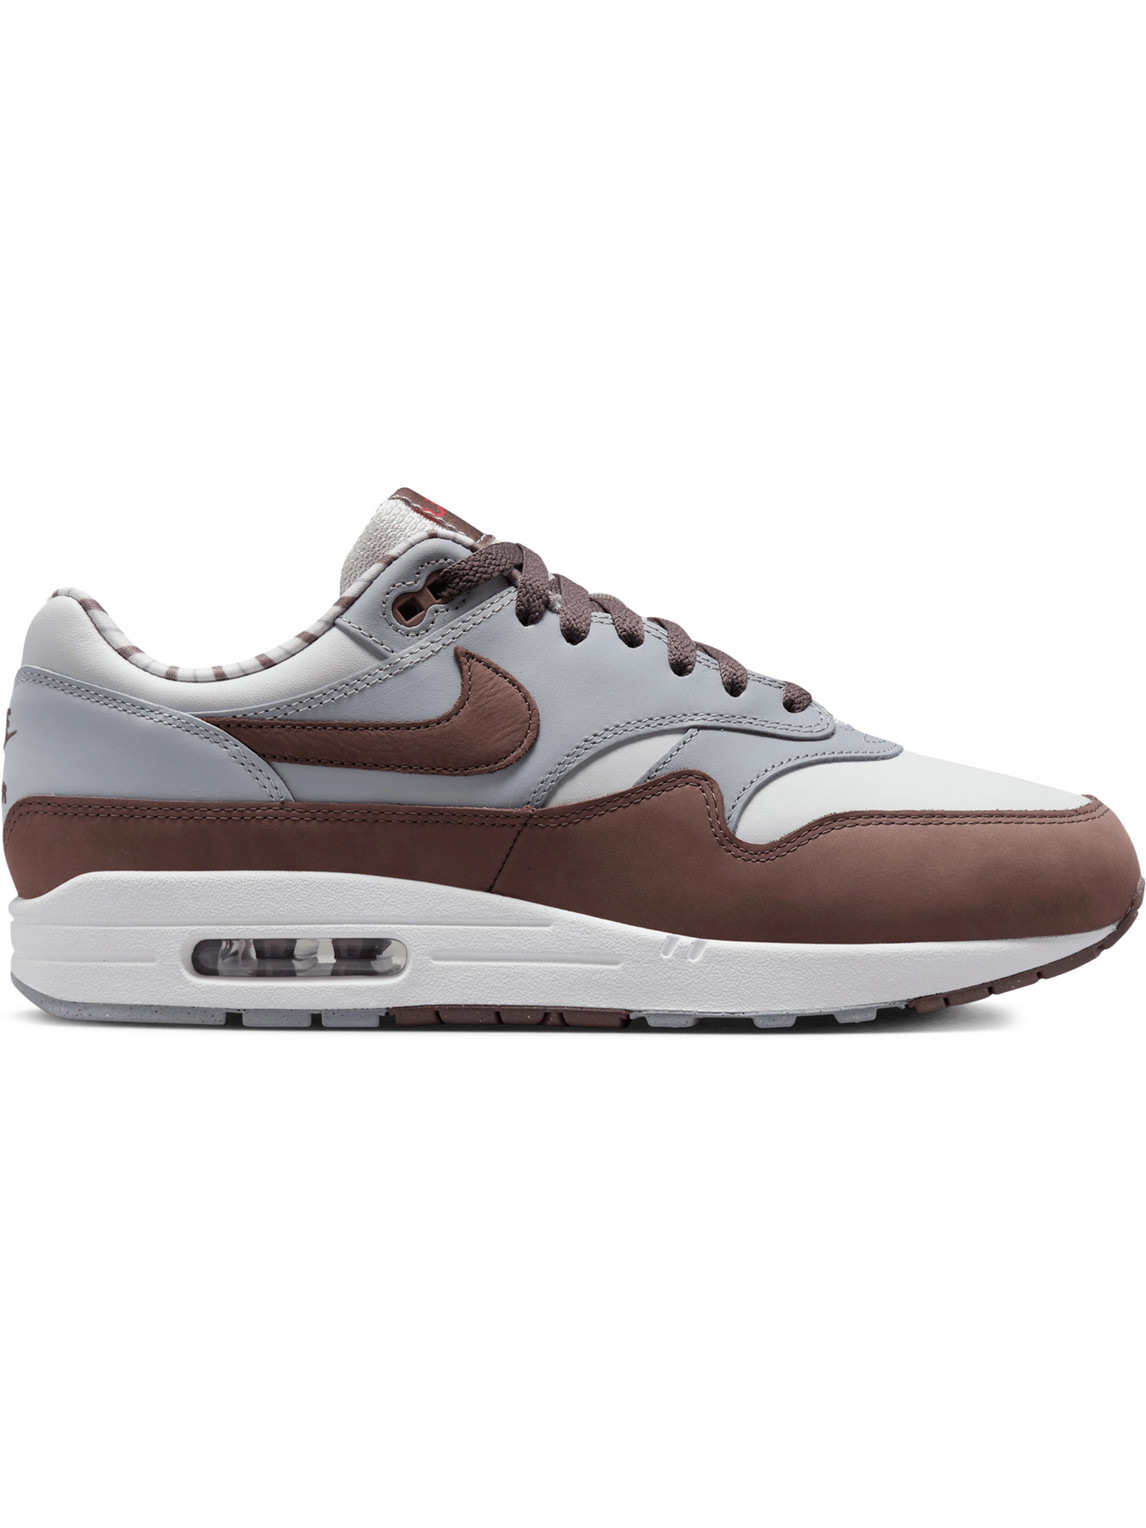 Nike Air Max 1 Leather Sneakers In Summit White/plum Eclipse-wolf Grey |  ModeSens